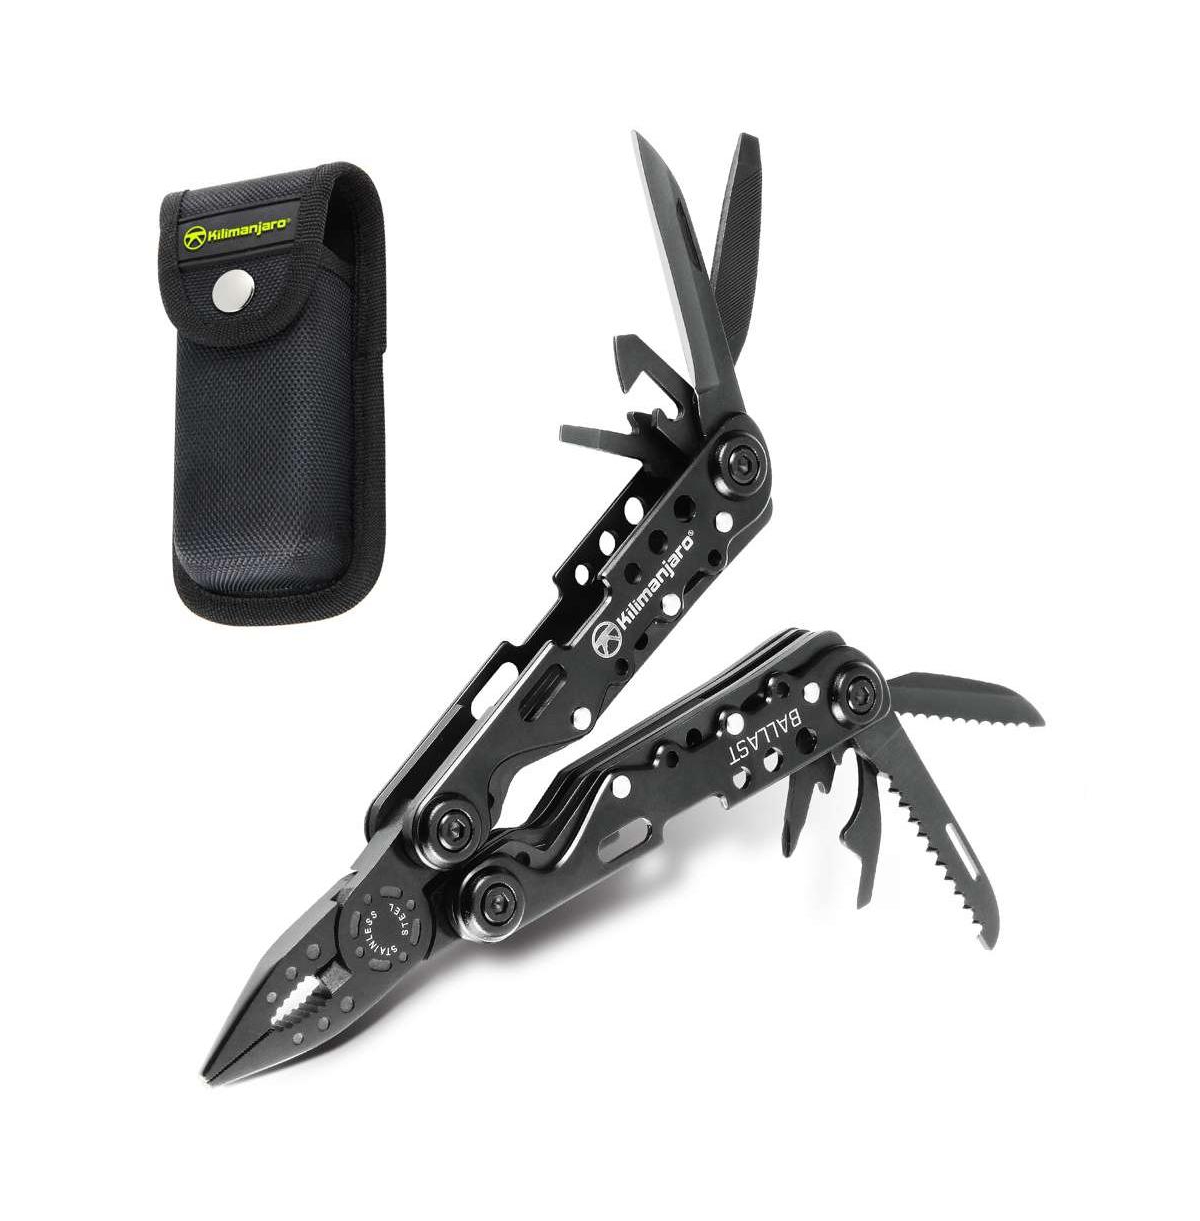 13-in-1 Multi-Tool with Pouch - Black